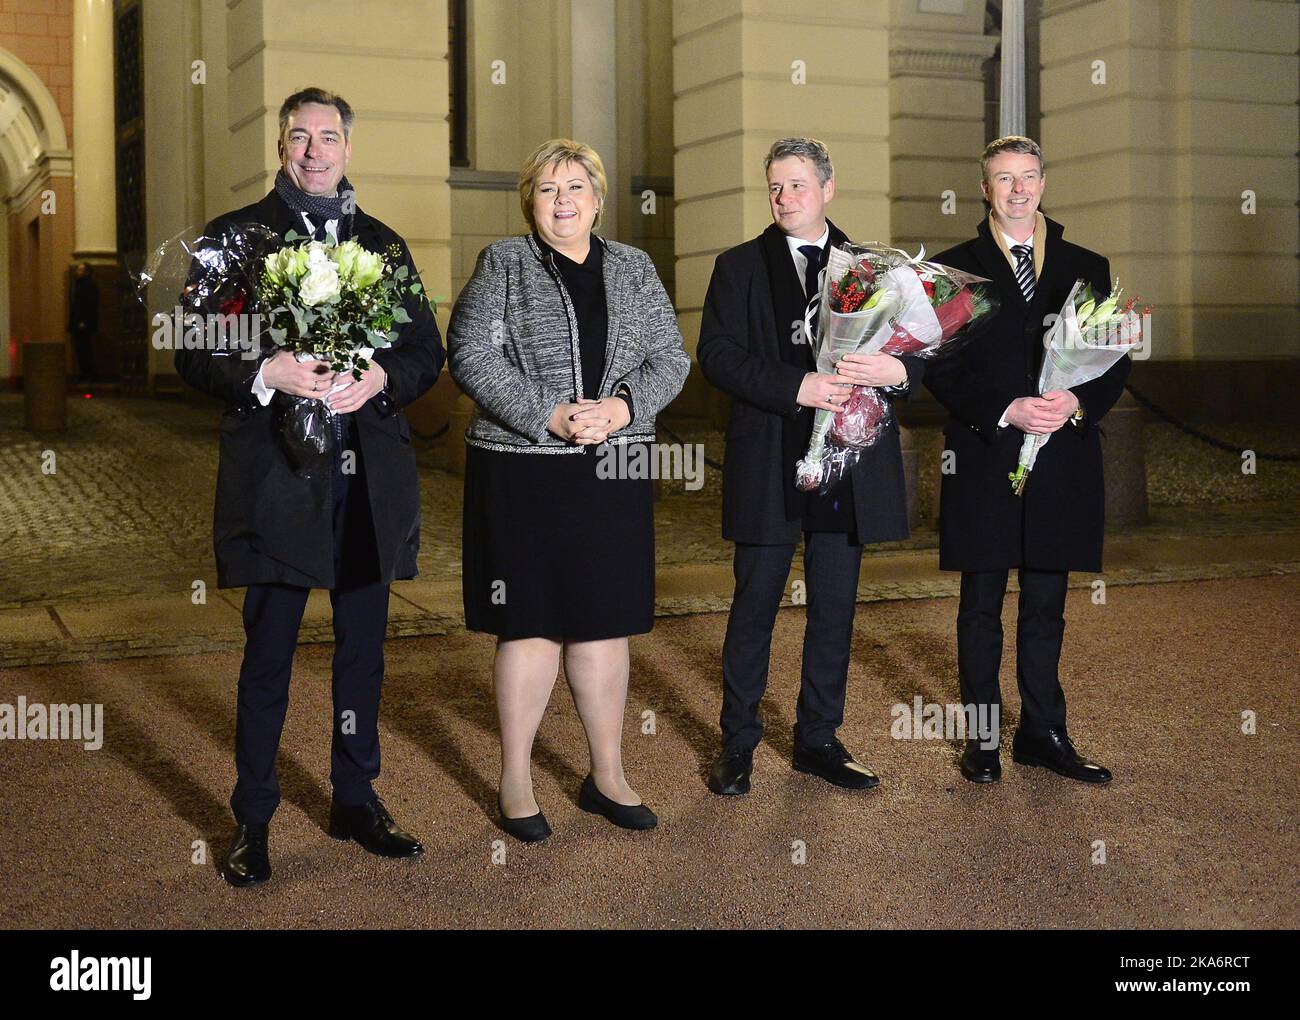 Norway`s Prime Minister Erna Solberg (2nd L) presents newly appointed Minister for EU affairs, Frank Bakke-Jensen (L), Minister for Oil and Energy, Terje Soviknes (2nd R) and Justice Minister Per-Willy Amundsen (R), outside the Royal Palace in Oslo, 20 December 2016. Photo by Fredrik Varfjell / NTB scanpix Stock Photo